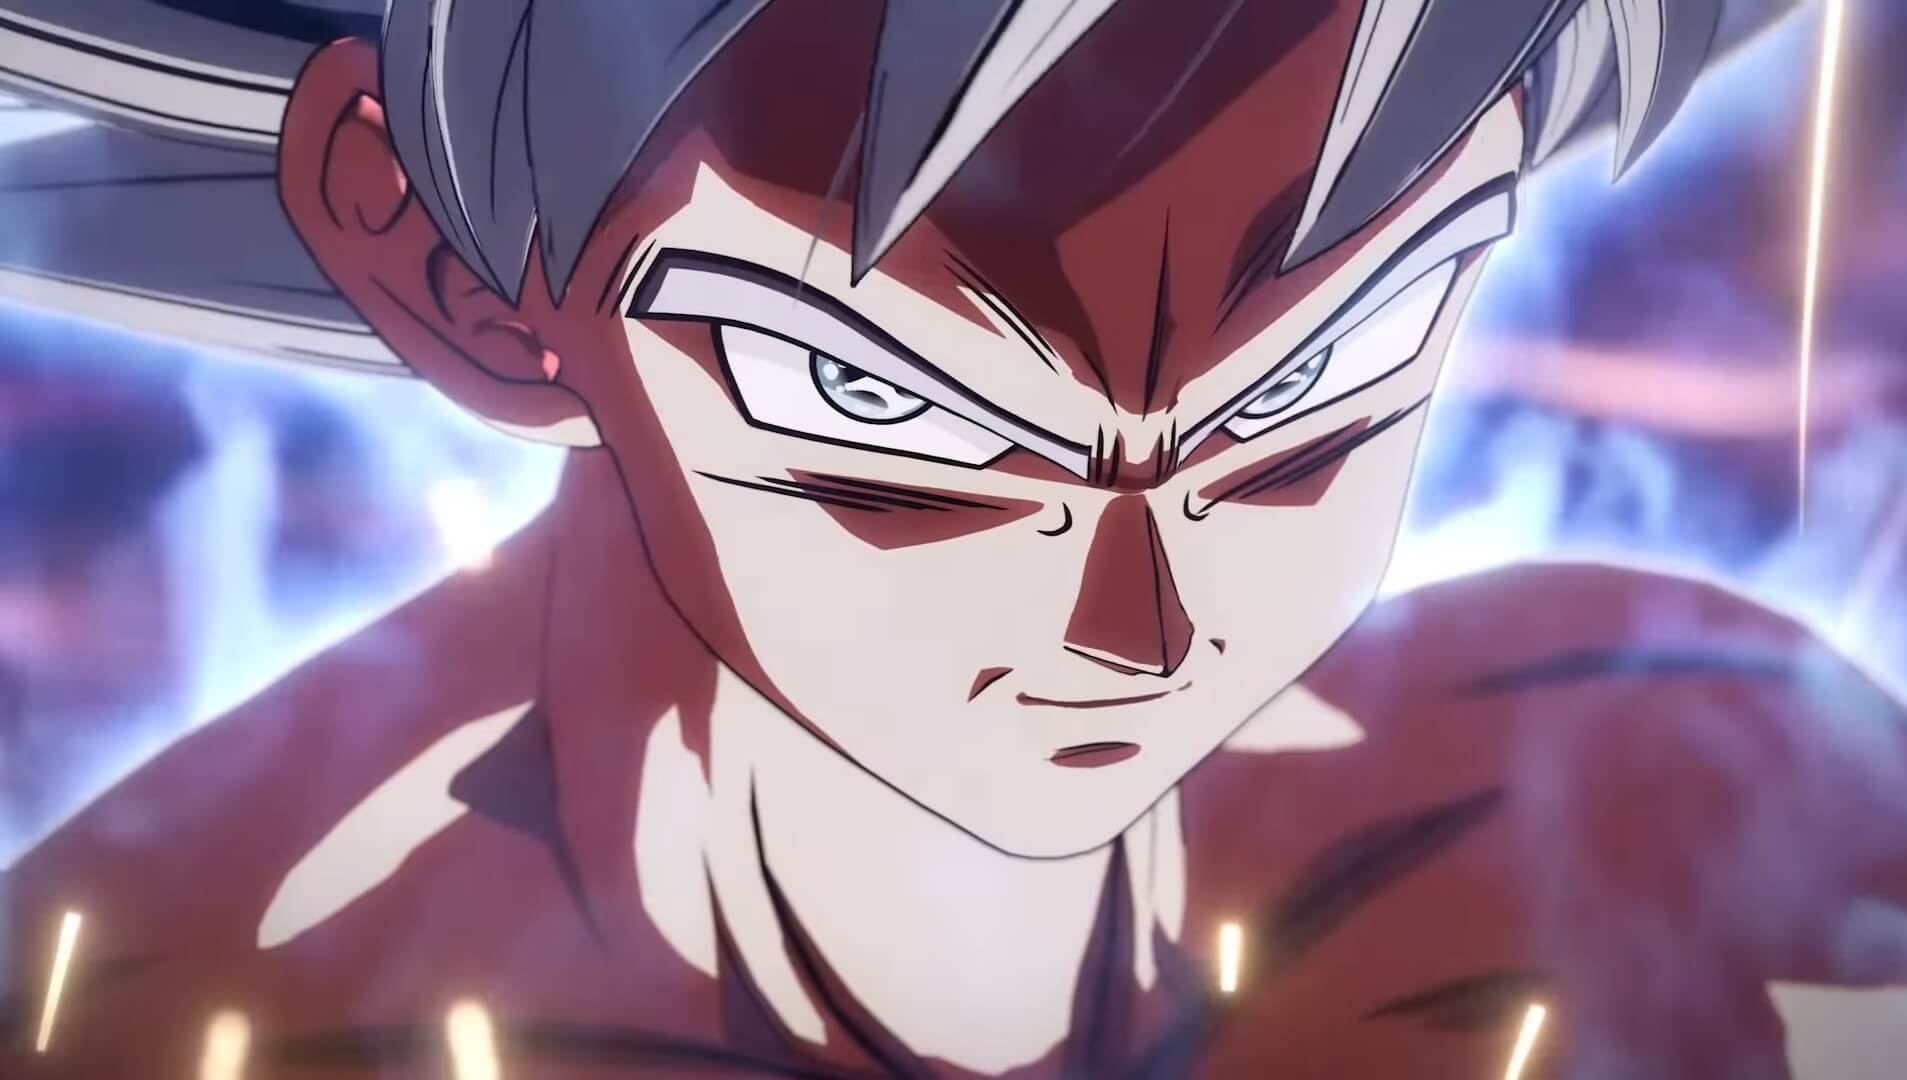 Sparking Zero just got a whole lot more intense | Source: Bandai Namco (YouTube)